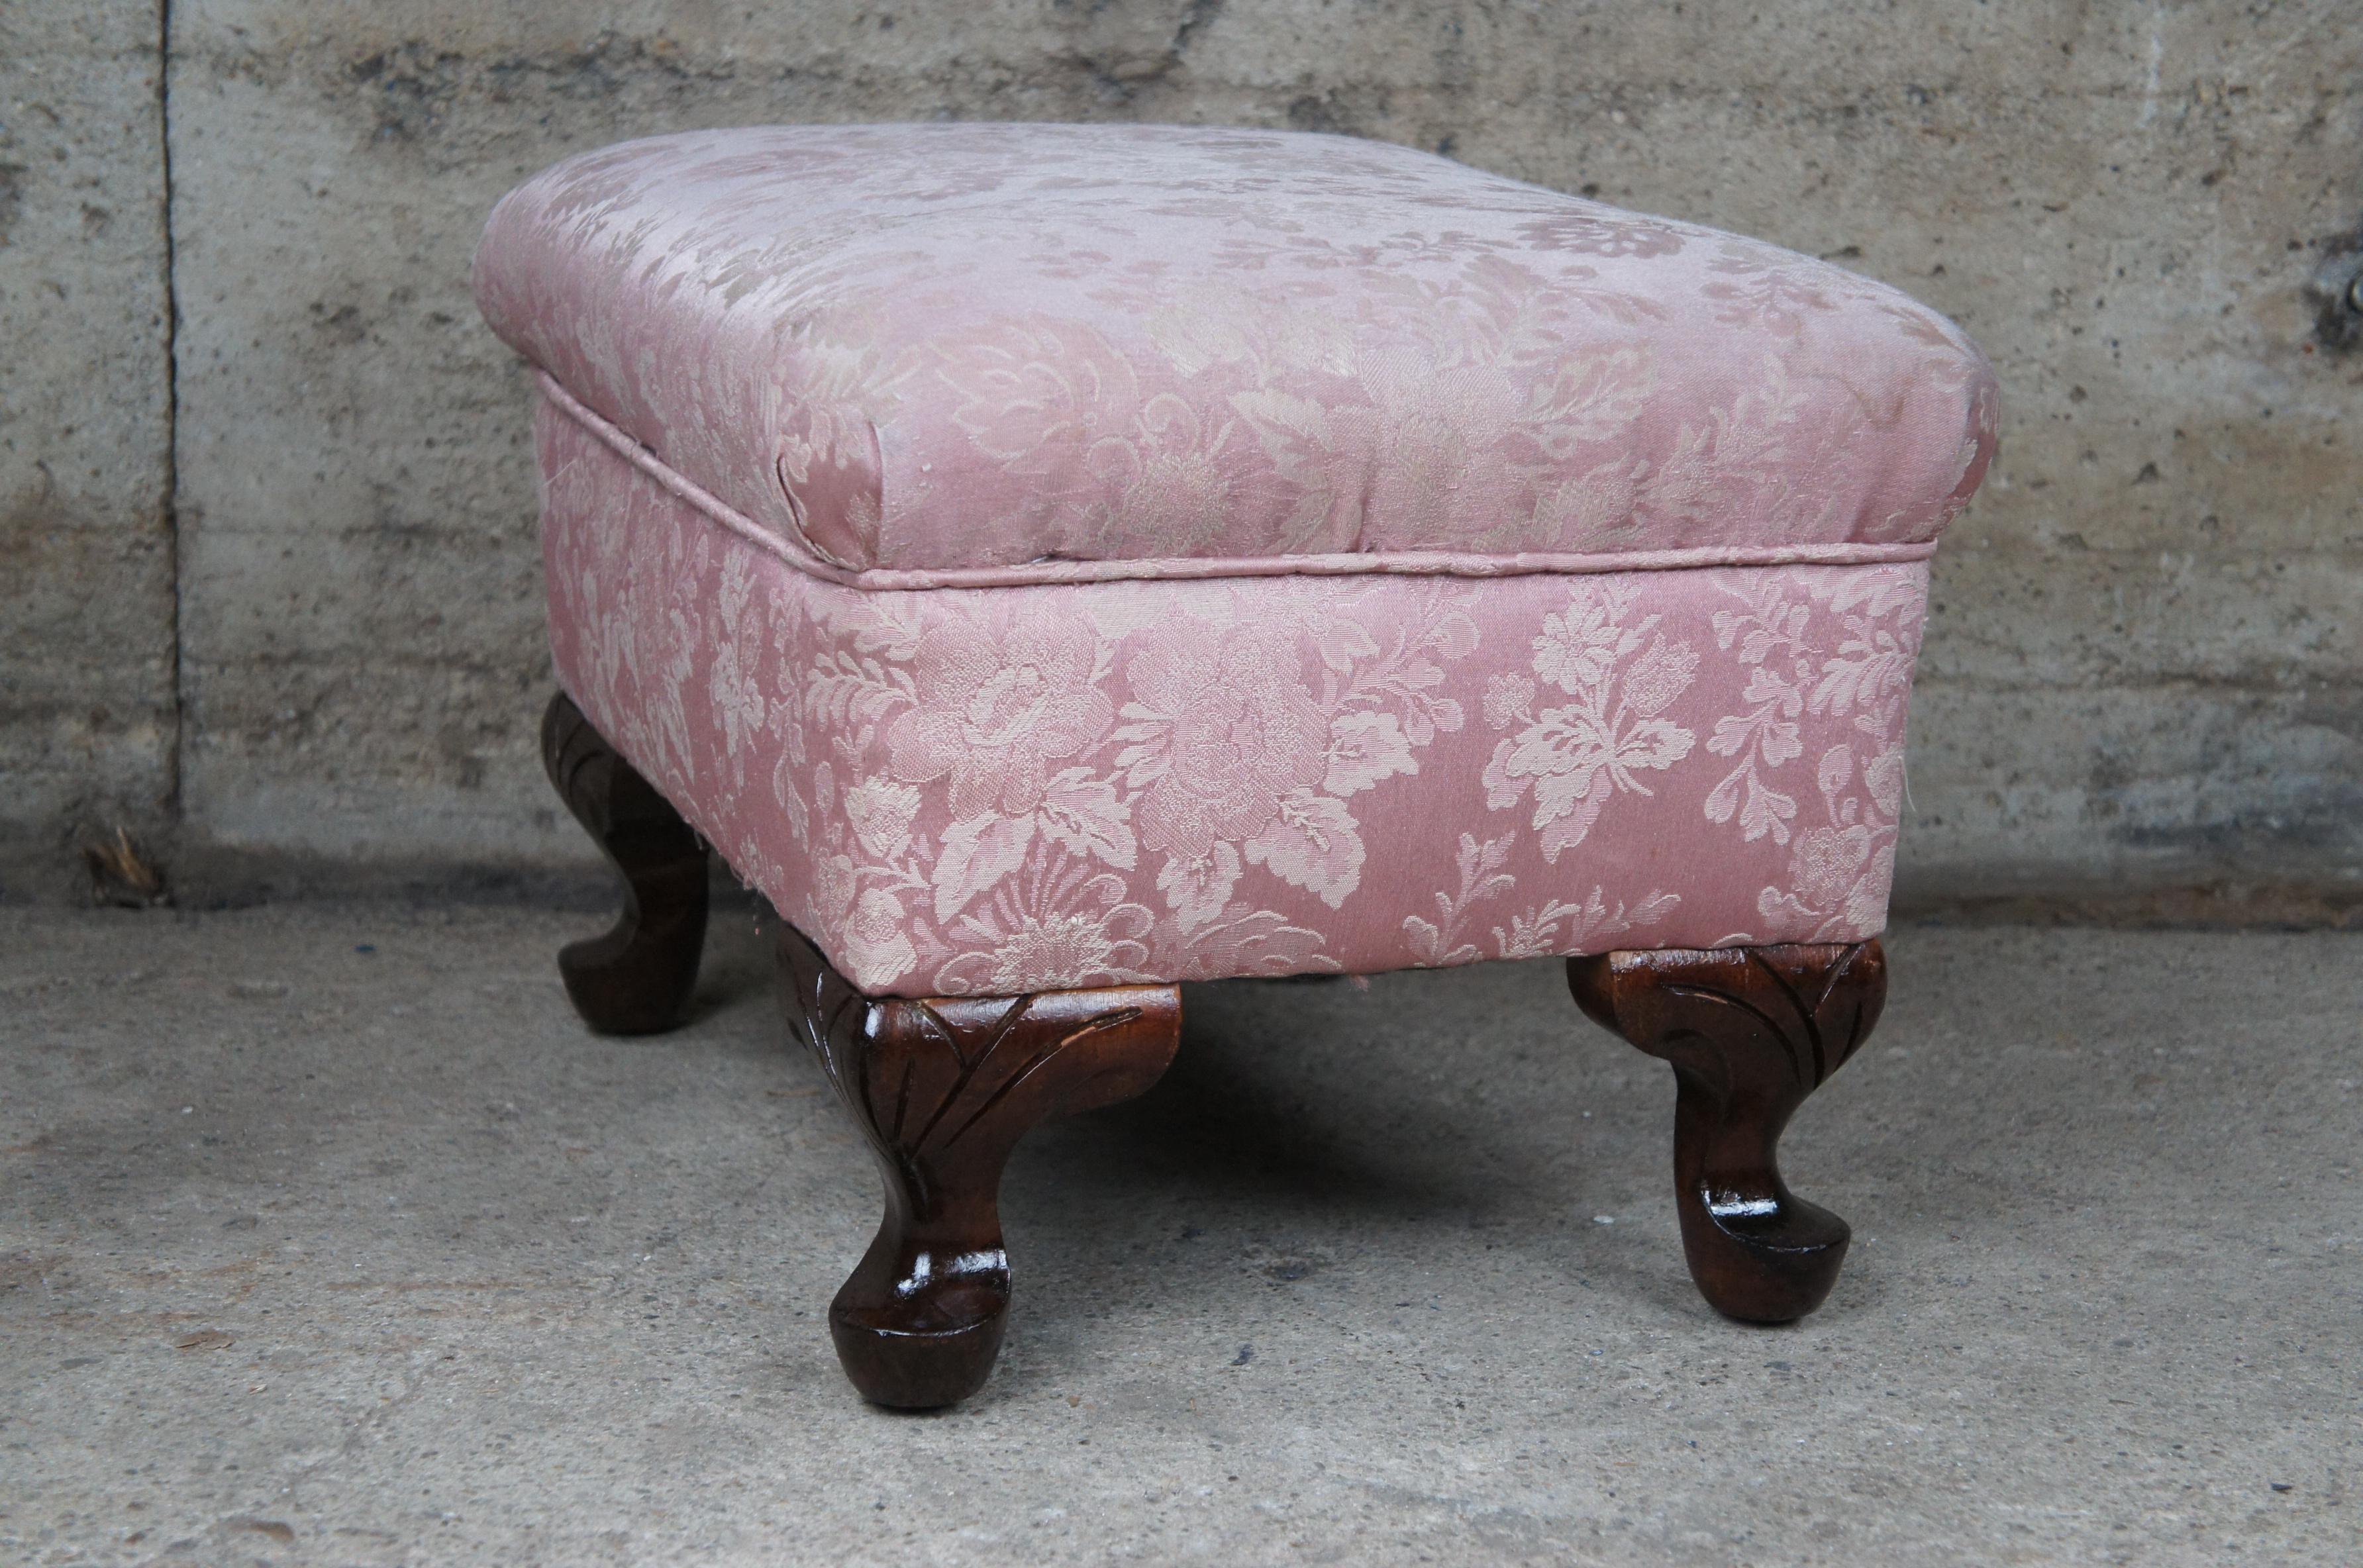 Vintage Queen Anne Floral Upholstered Walnut Ottoman Foot Stool Vanity Pouf Pink 3